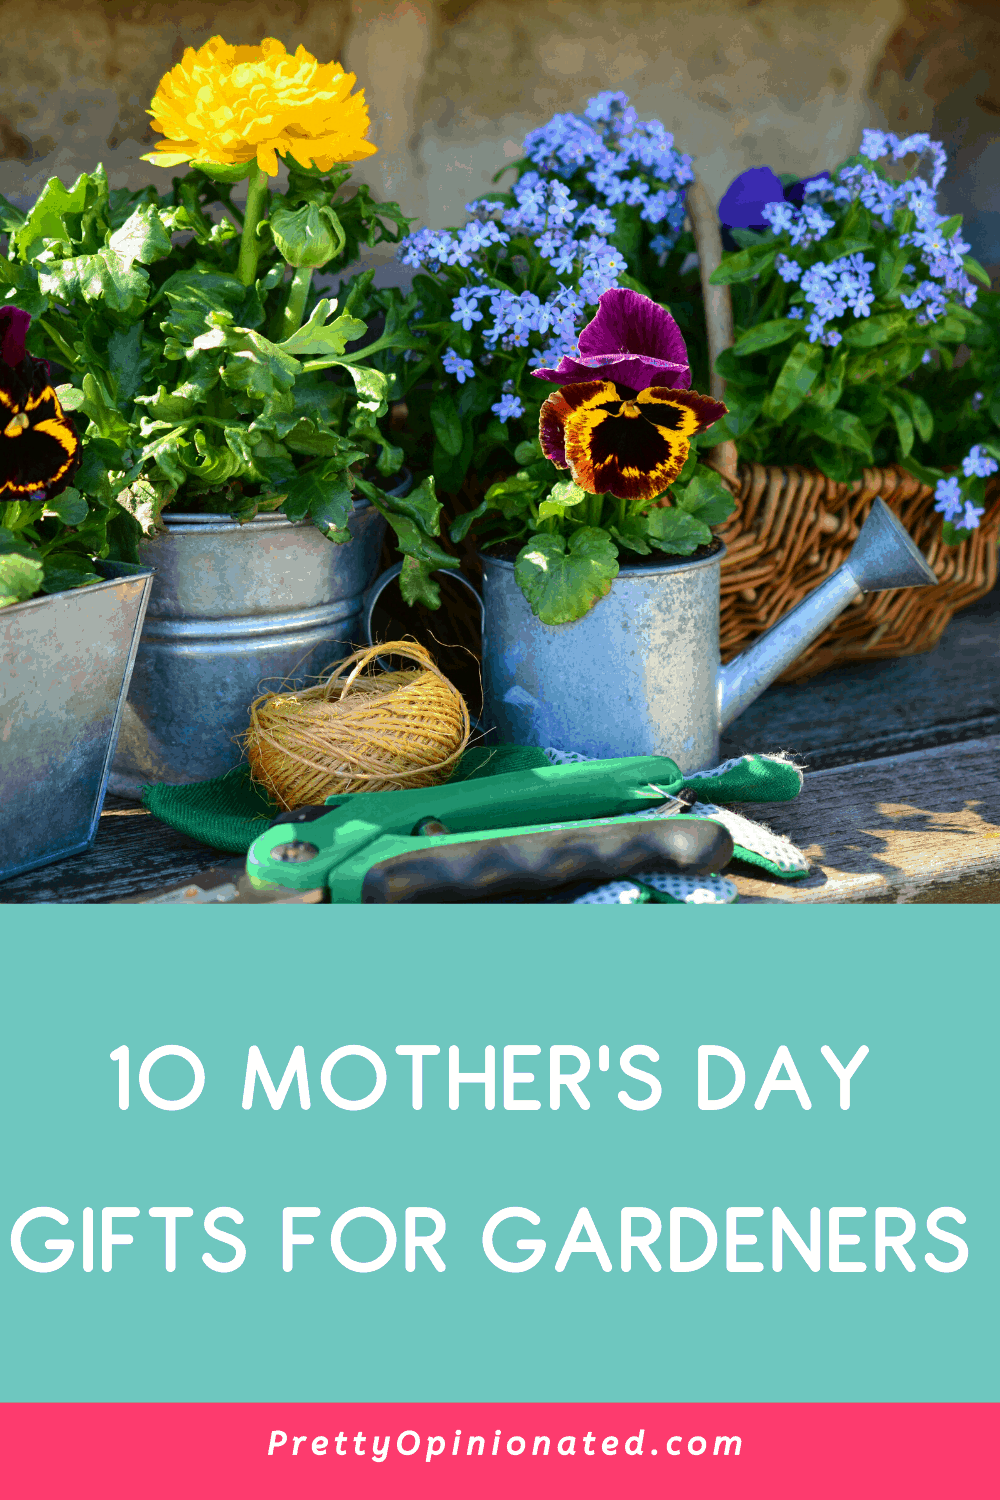 When you’re buying for someone who loves spending time in the garden, there’s a huge selection of great gift ideas out there. These 10 Great Gift Ideas for Mothers Who Love Gardening will help you find the perfect present!